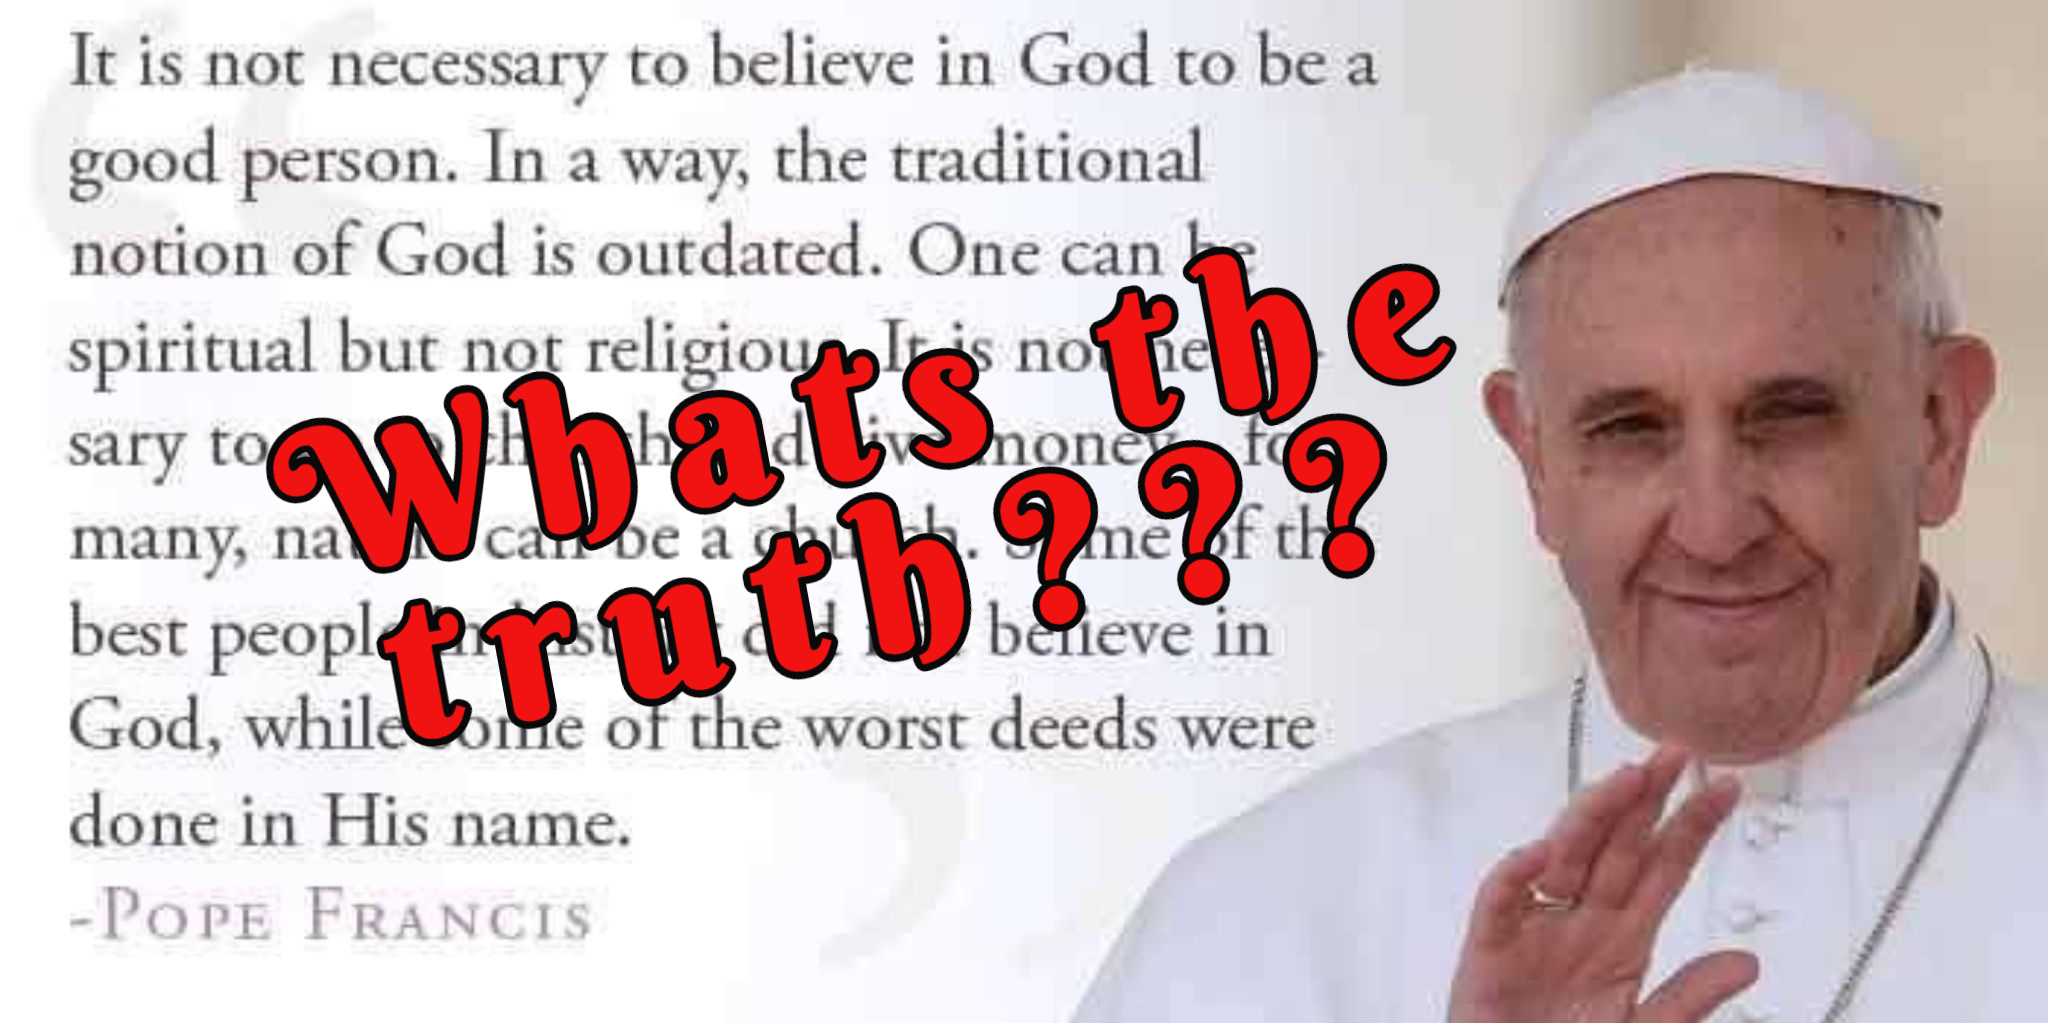 It's not necessary to believe in God- Pope Francis?